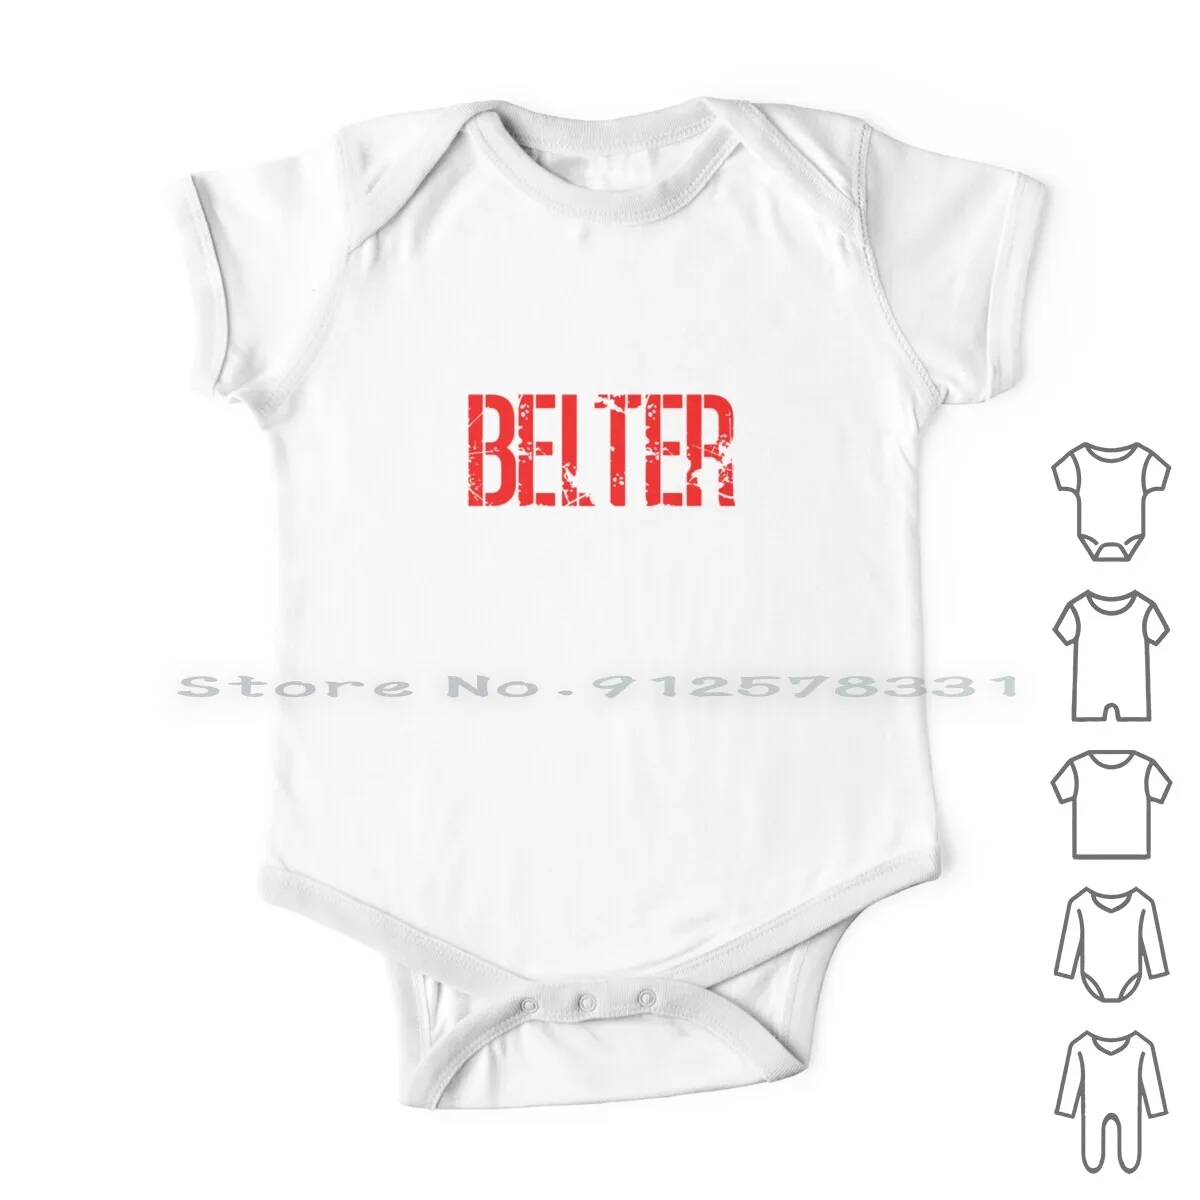 

Gerry Cinnamon Belter She Is A Belter Newborn Baby Clothes Rompers Cotton Jumpsuits Gerry Cinnamon Erratic Cinematic Glasgow